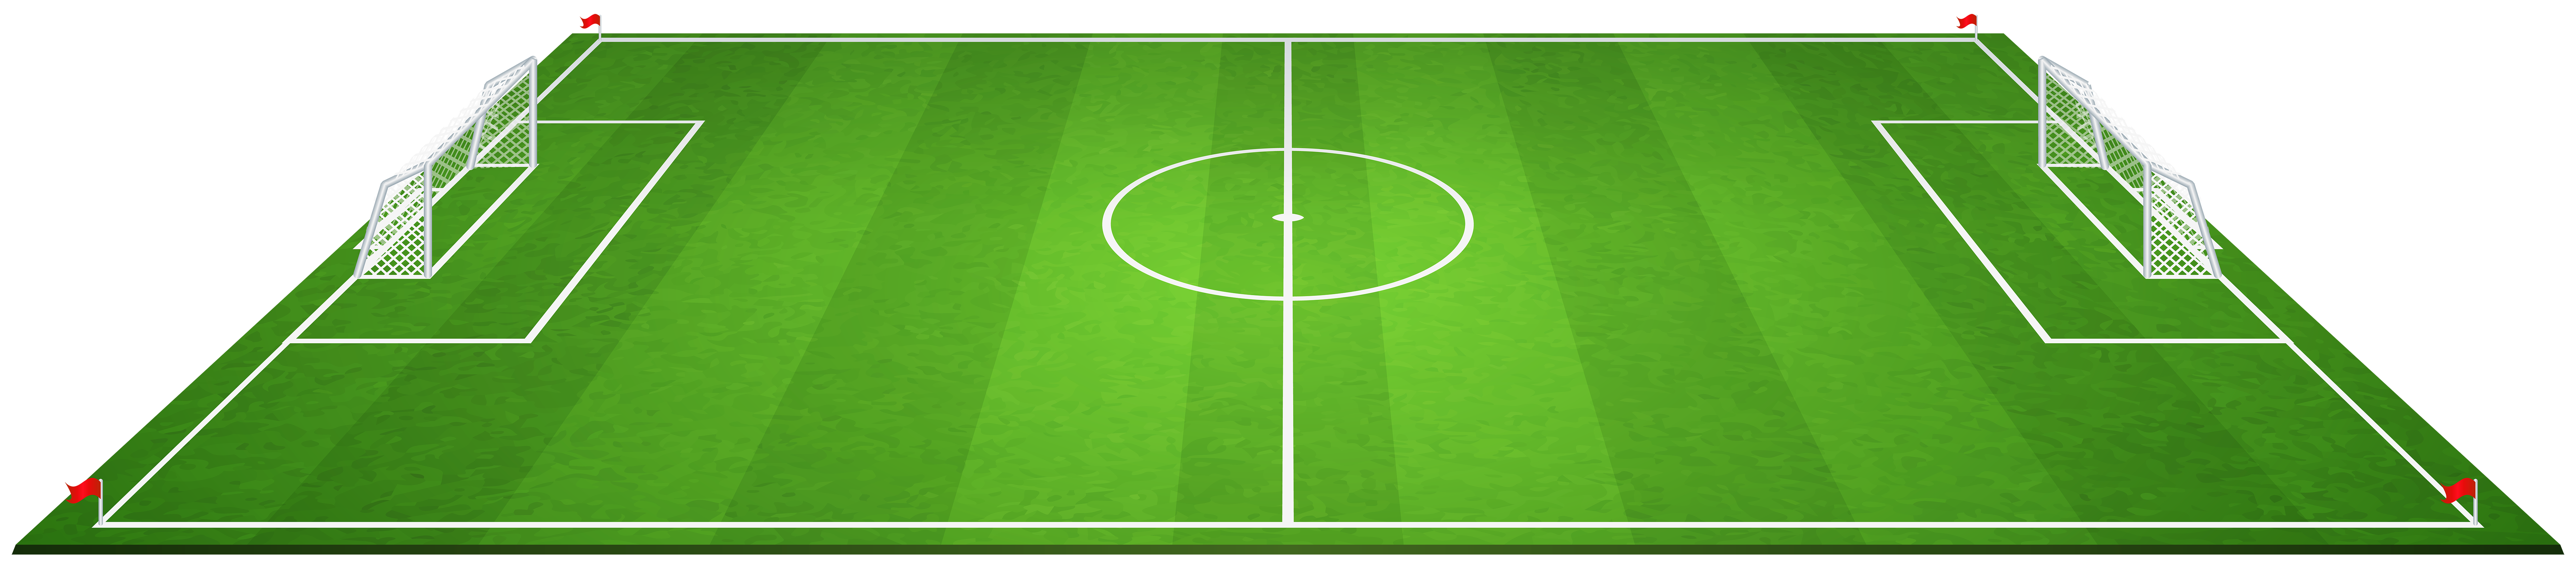 Soccer Field Transparent PNG Image | Gallery Yopriceville - High